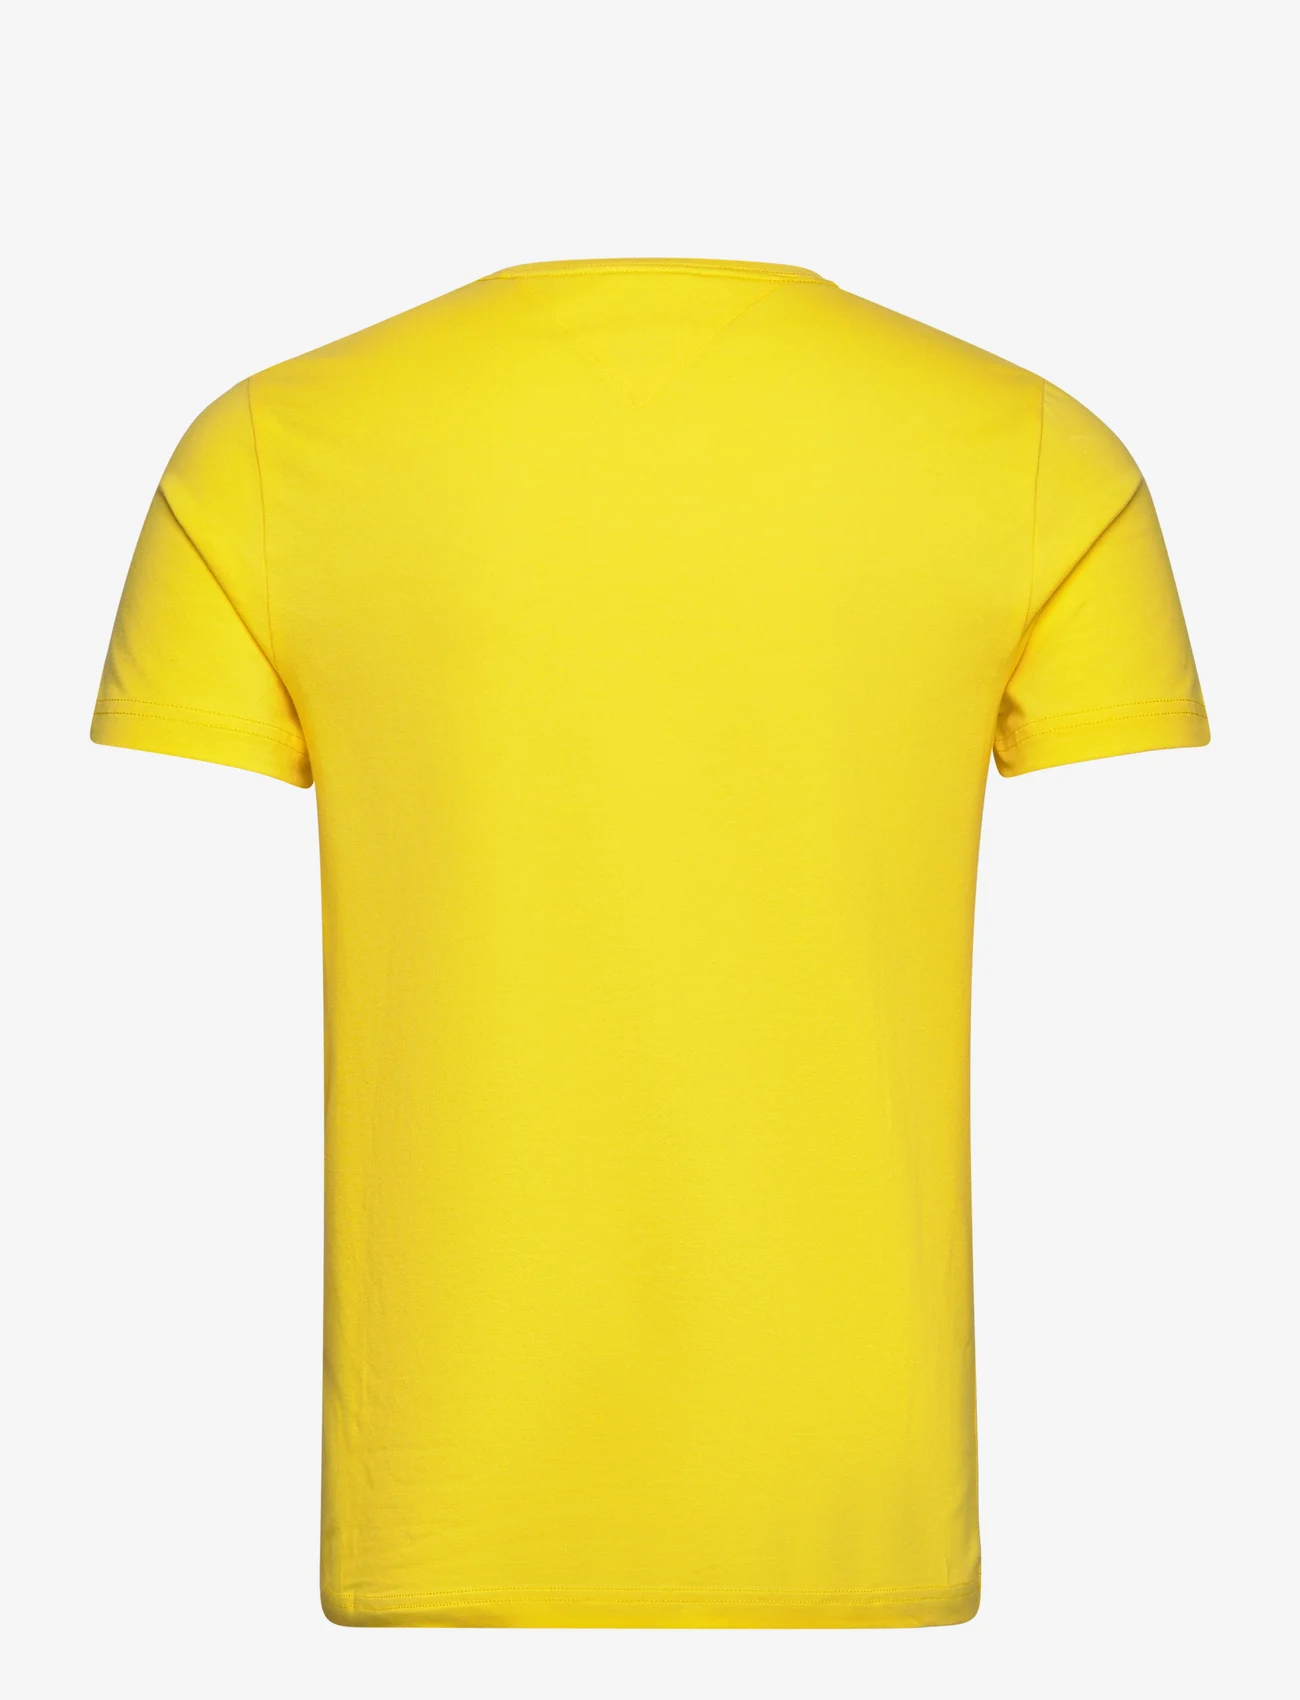 Tommy Hilfiger - STRETCH SLIM FIT TEE - lowest prices - eureka yellow - 1